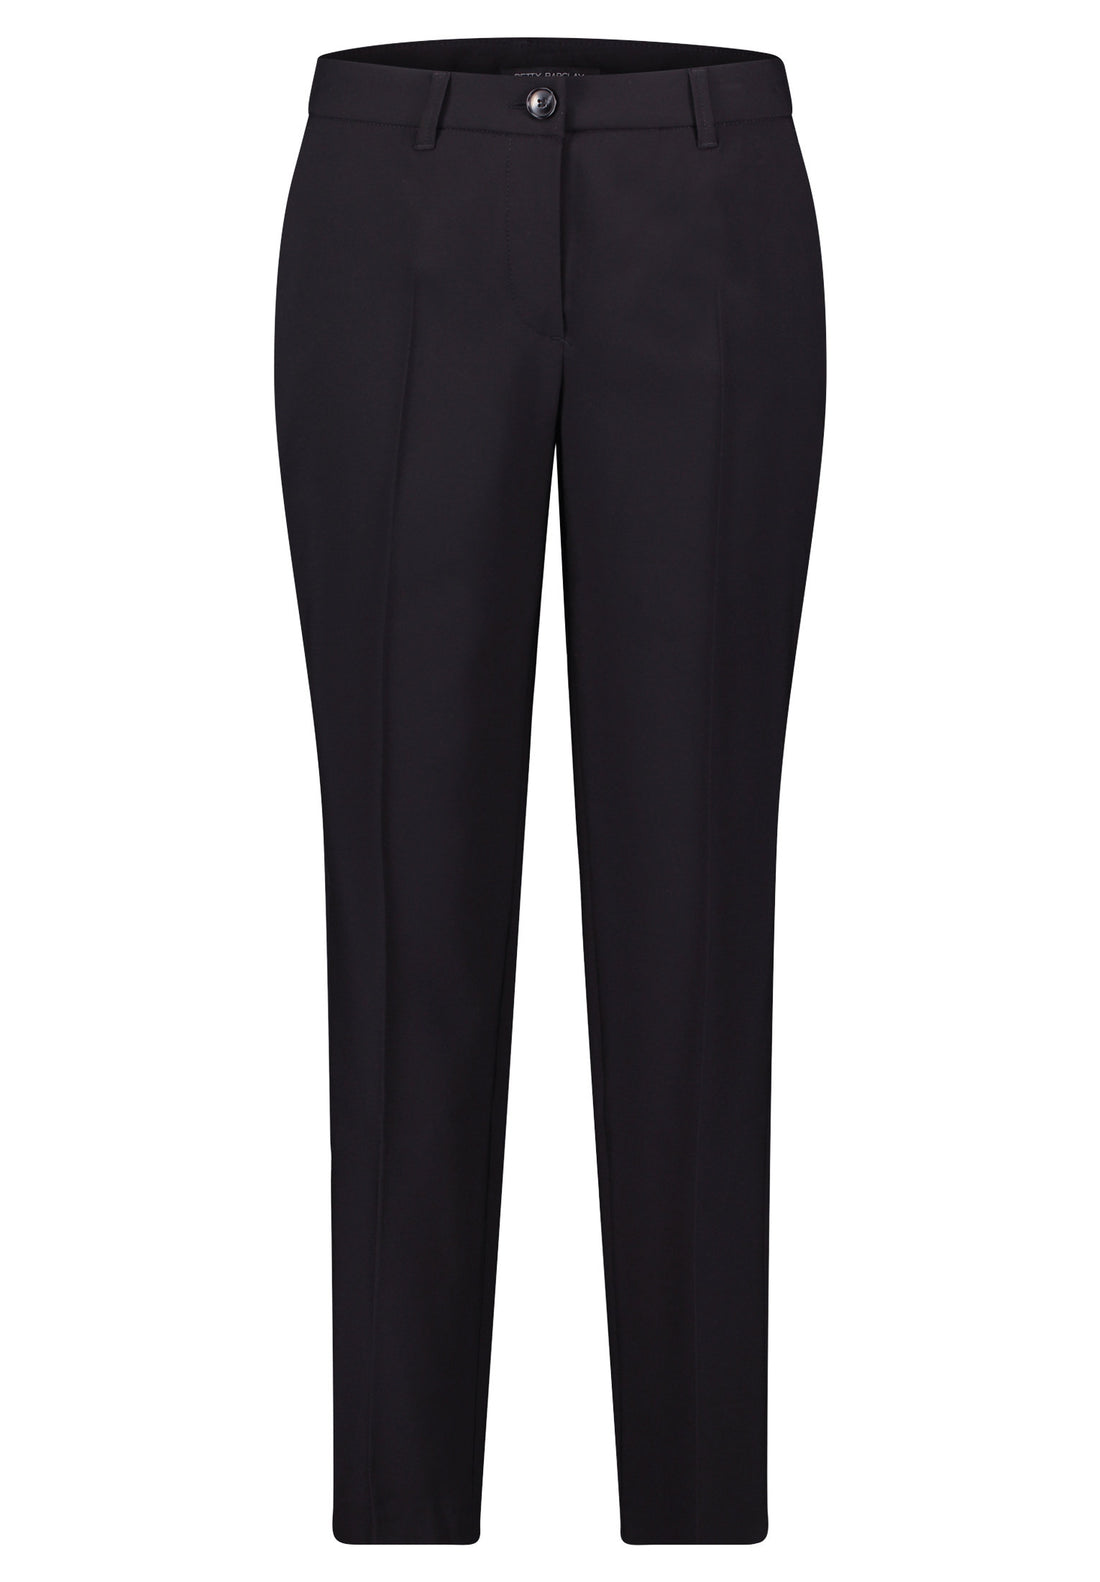 Business Trousers
With Crease_6002-1080_9045_02